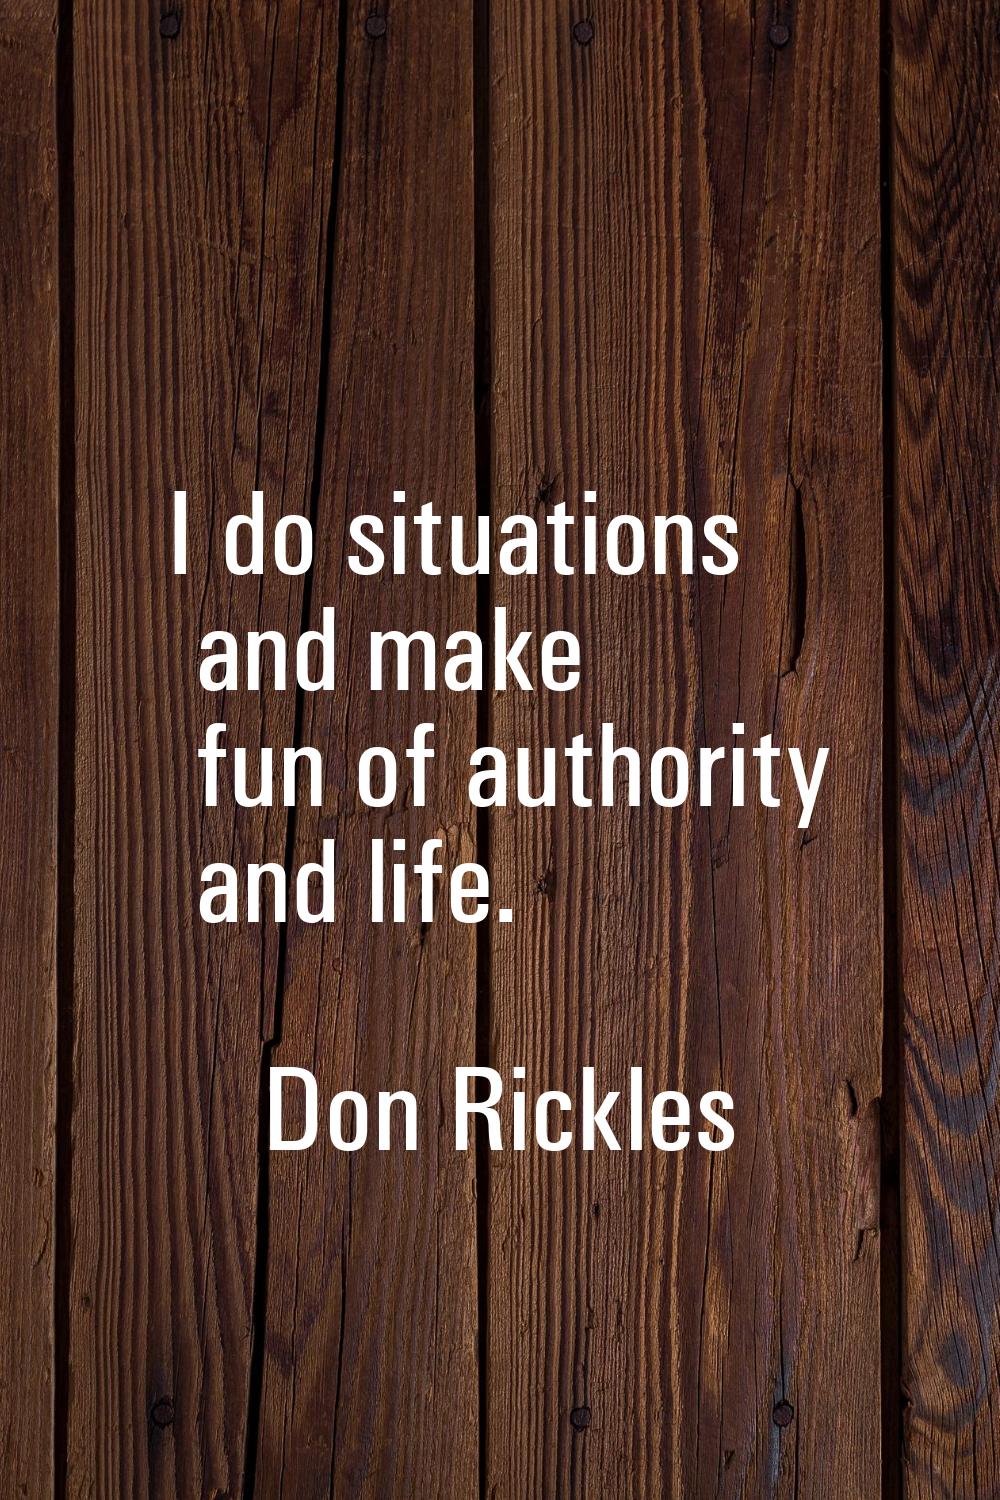 I do situations and make fun of authority and life.